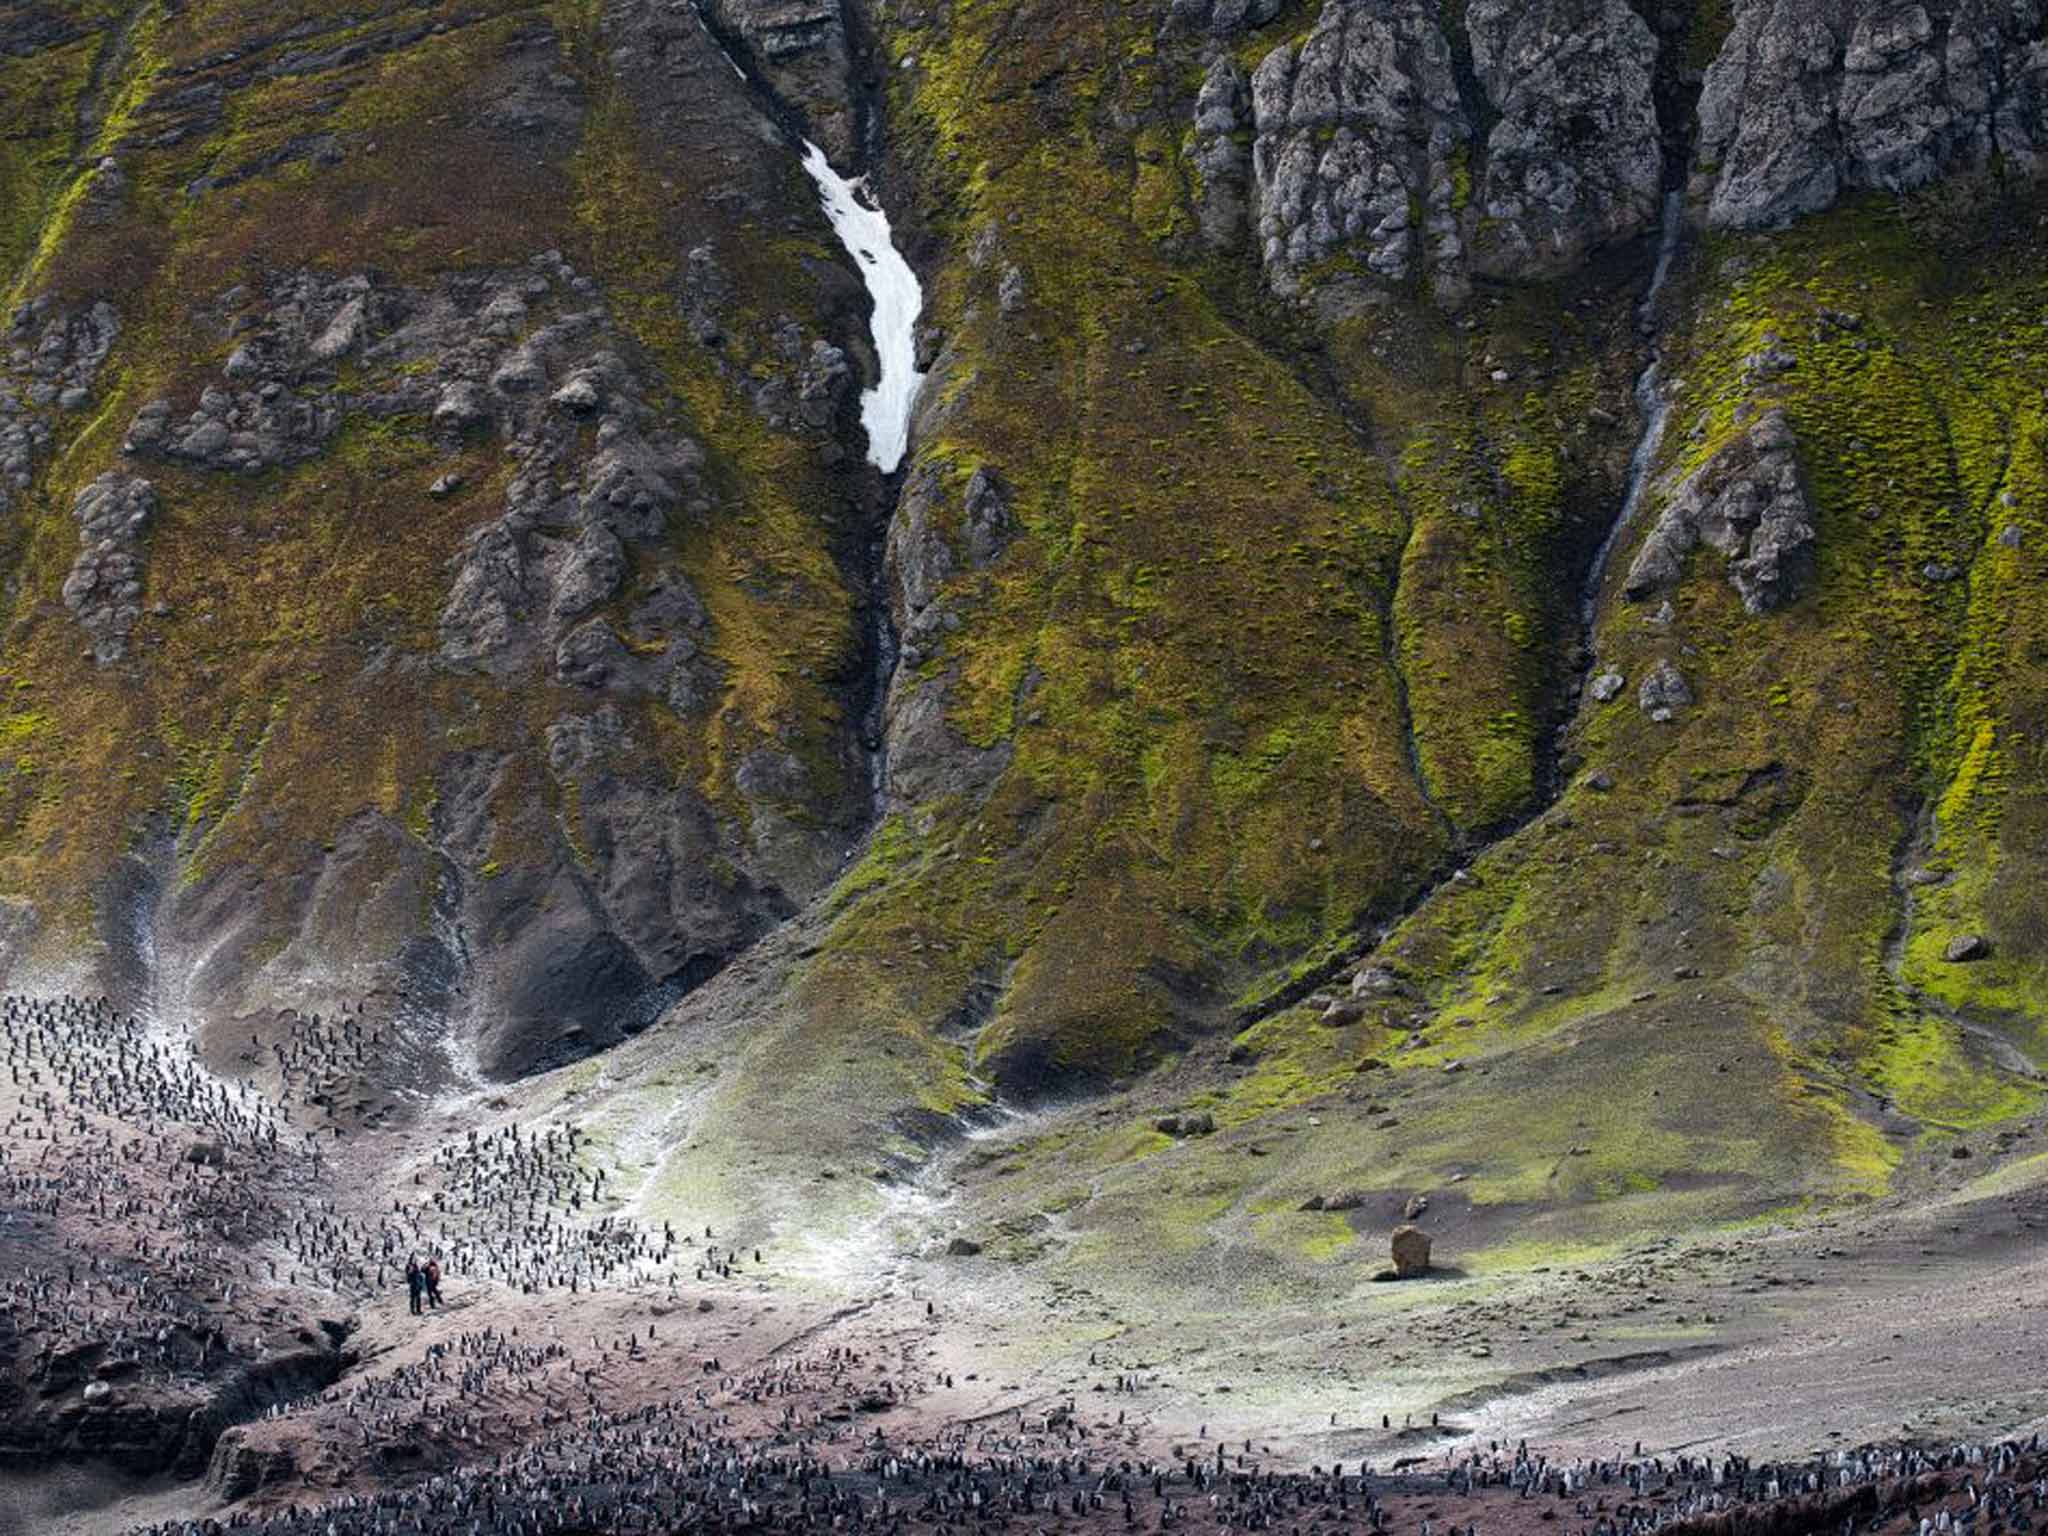 Winner: Landscape category - Penguins in the South Shetlands (Baily Head, Deception Island, Antarctica) by Fred Barrington